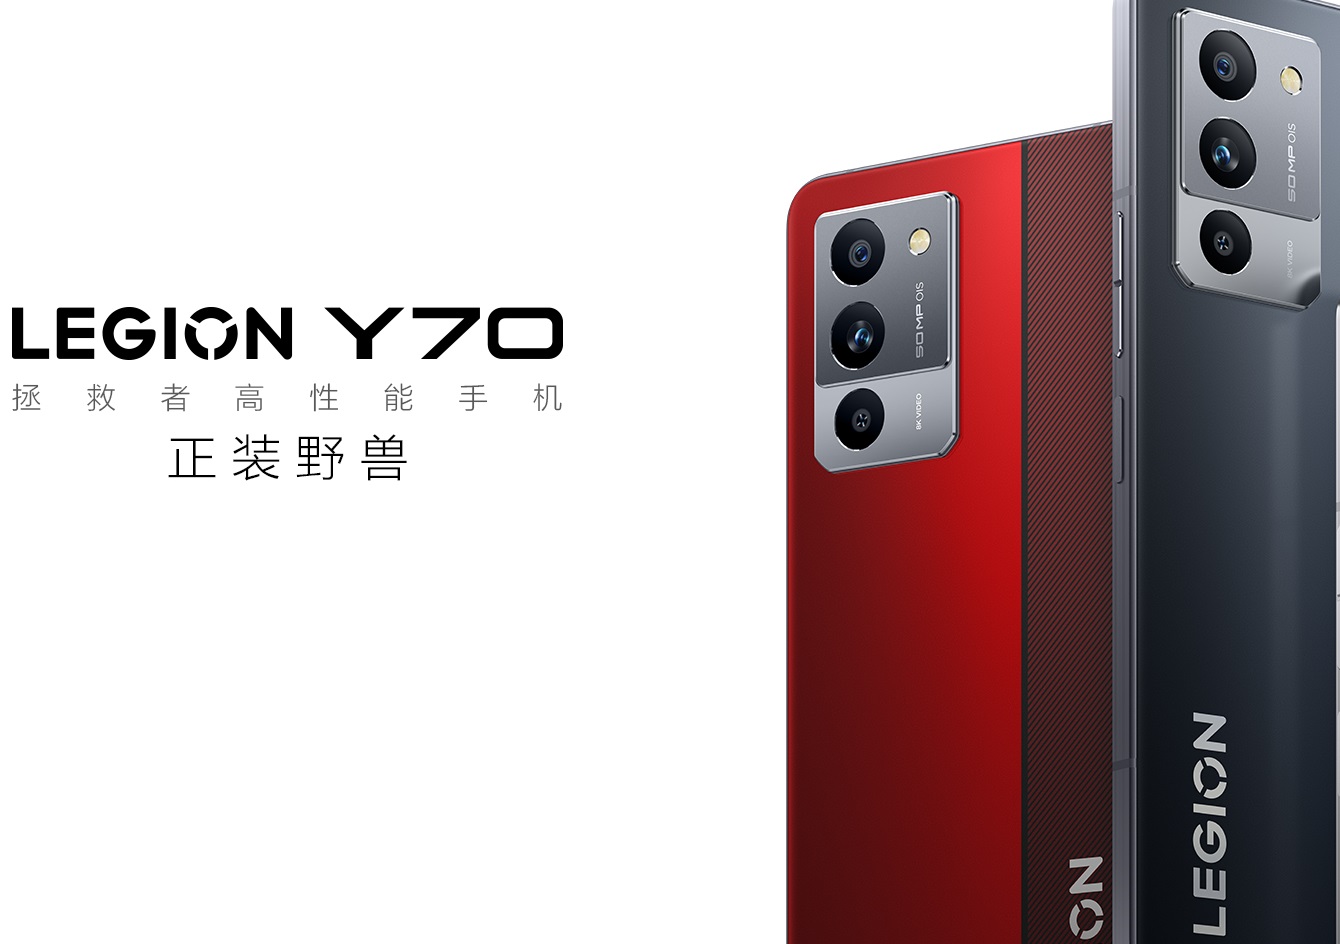 Lenovo Legion Y70: High-end smartphone model with Snapdragon 8+ Gen1 and a built-in cooling mechanism announced Lenovo Legion Y70